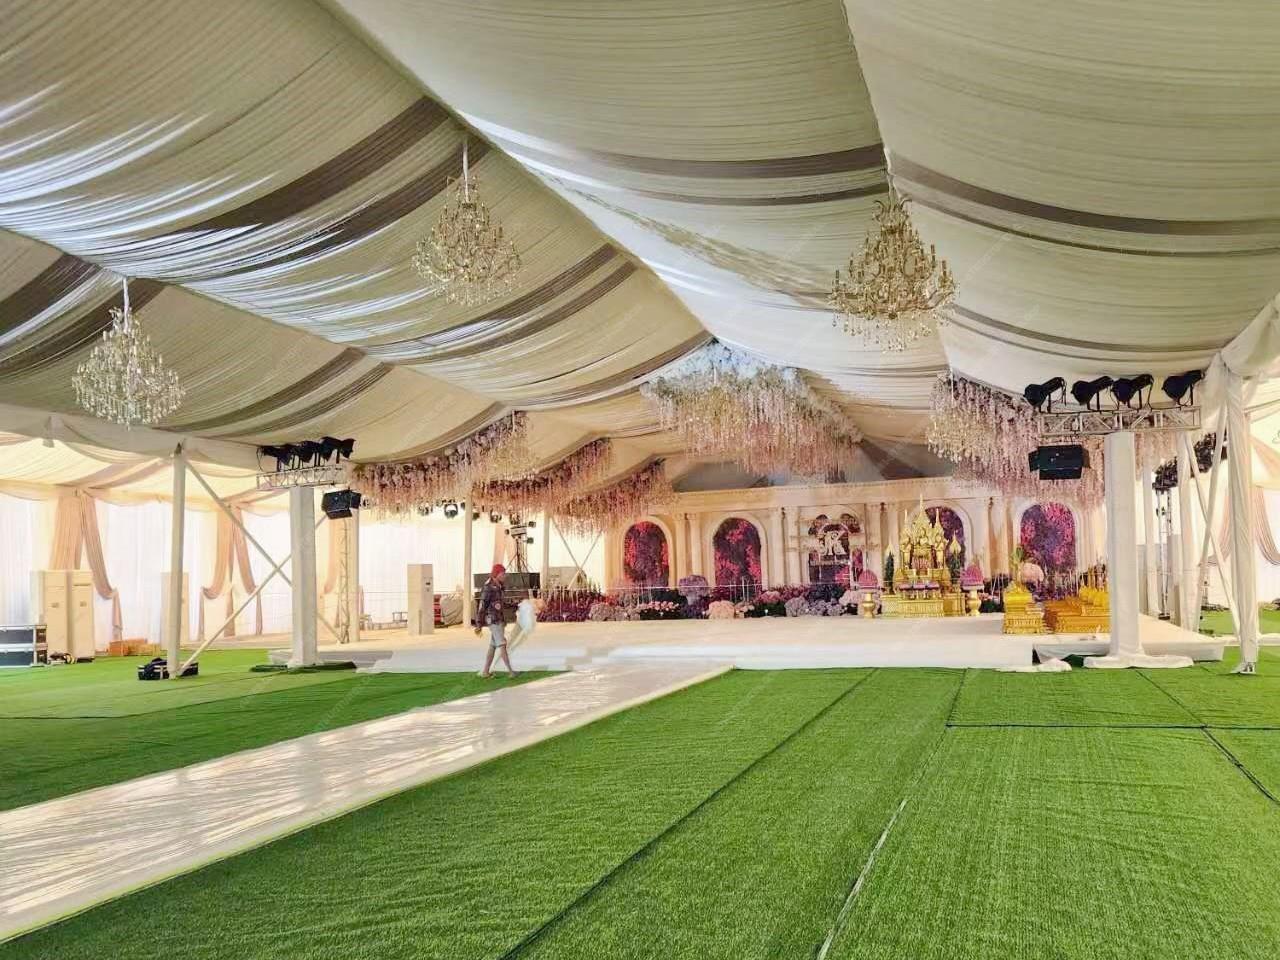 Decorated wedding party tent